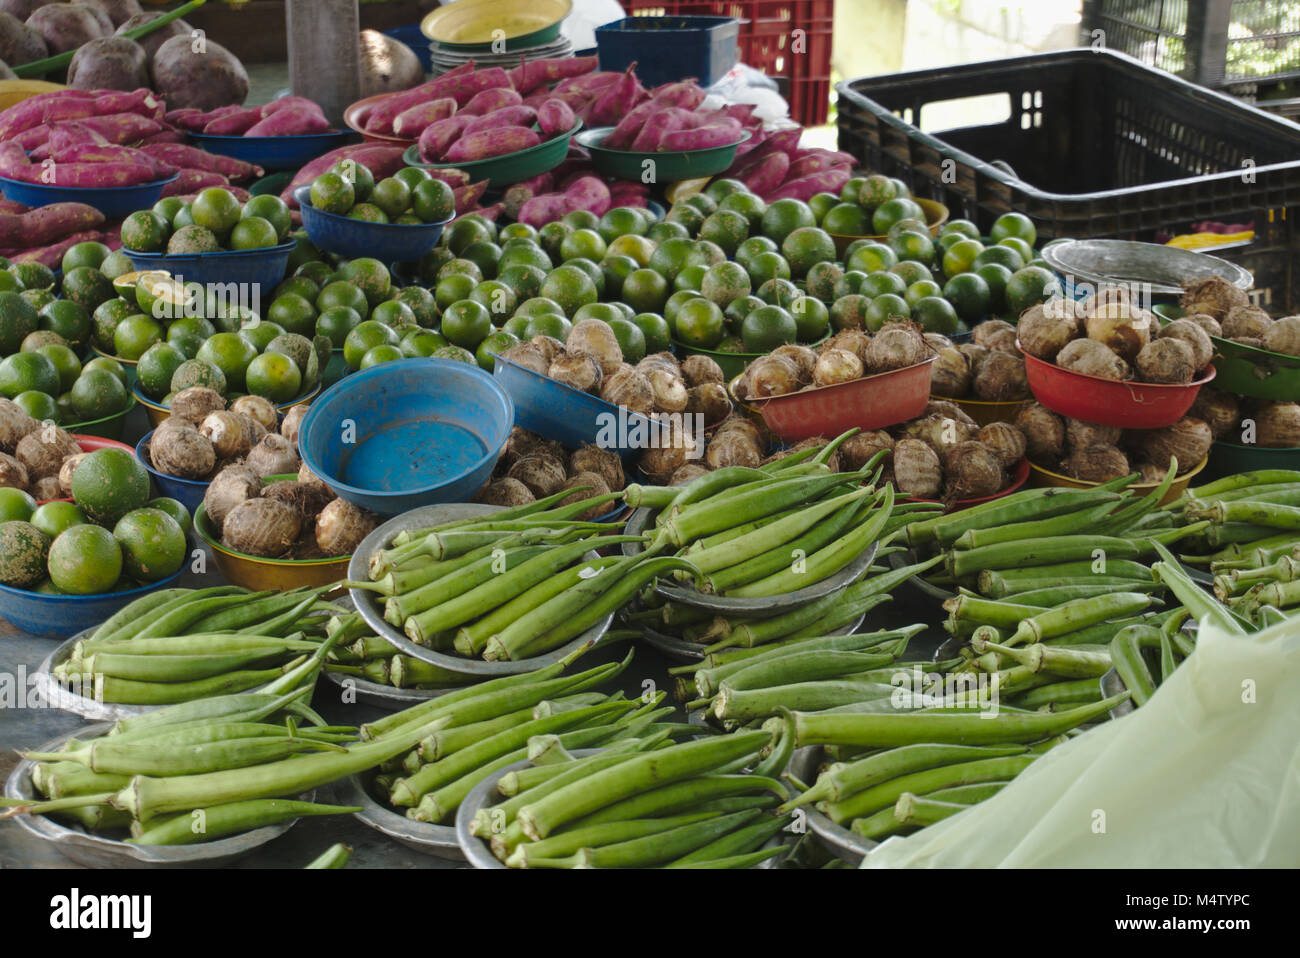 Okra, yam, lime, and red sweet potato at farmers market stall. Stock Photo